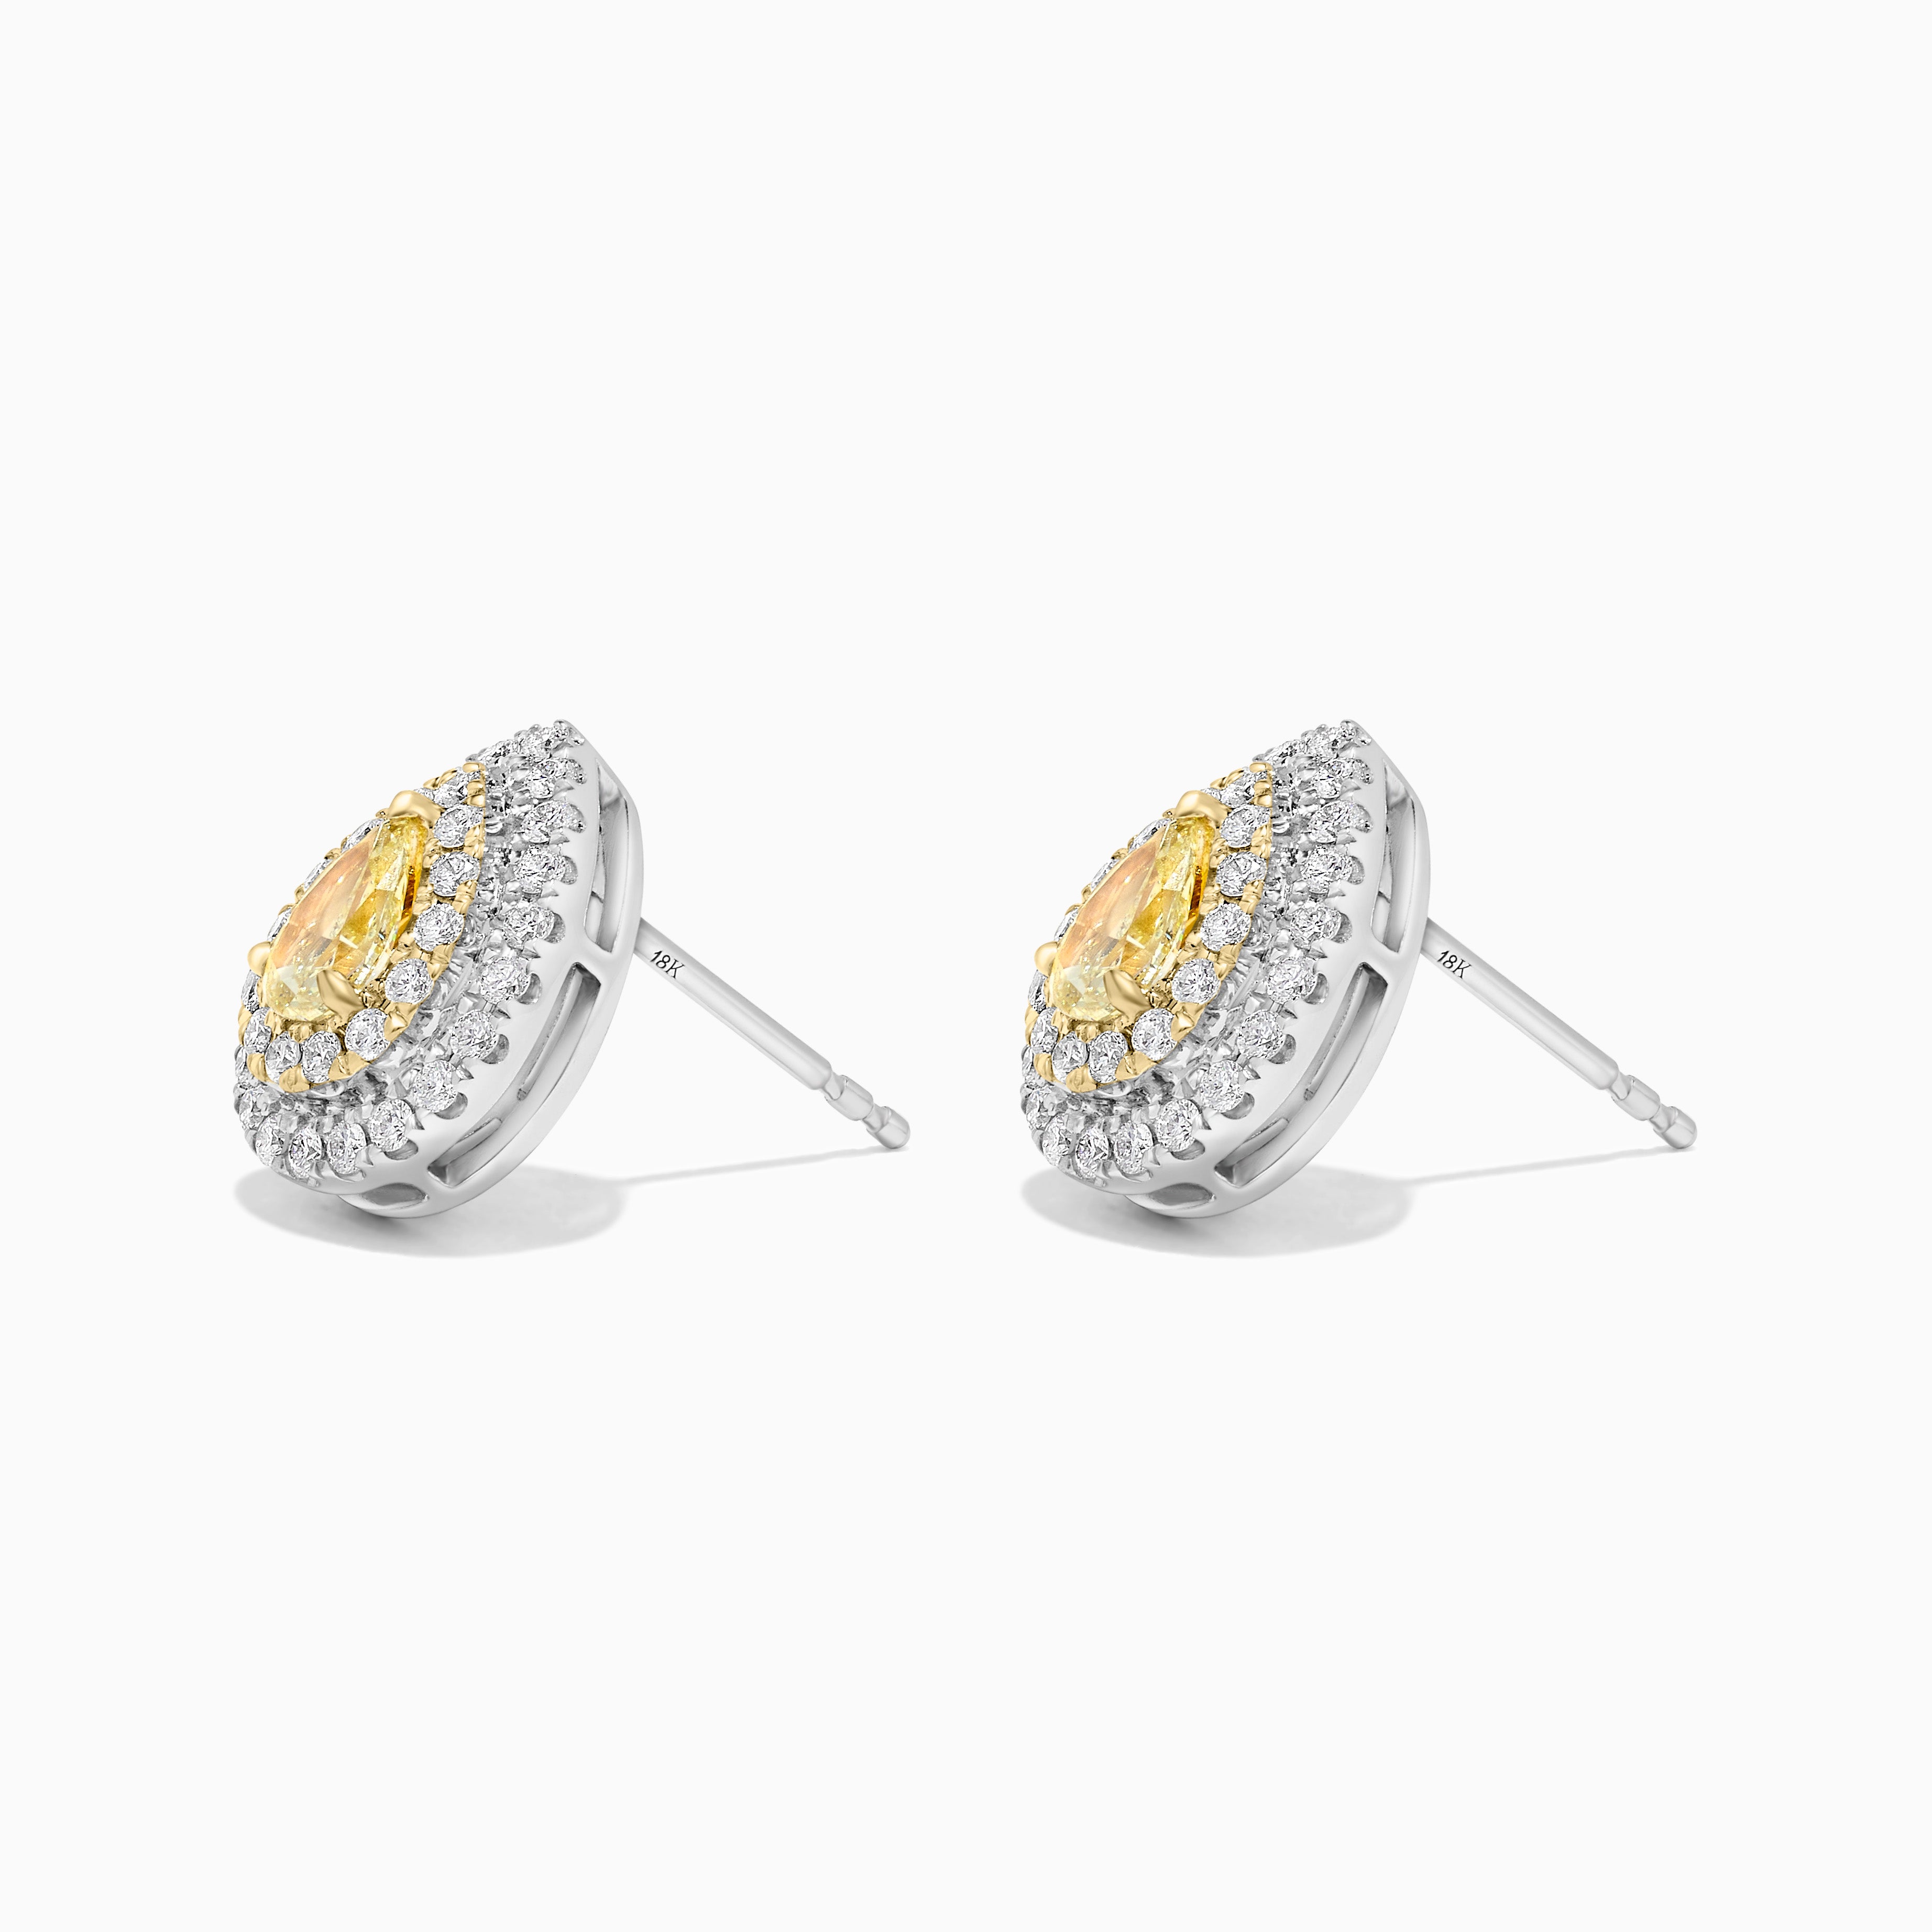 Natural Yellow Pear and White Diamond 1.14 Carat TW Gold Stud Earrings